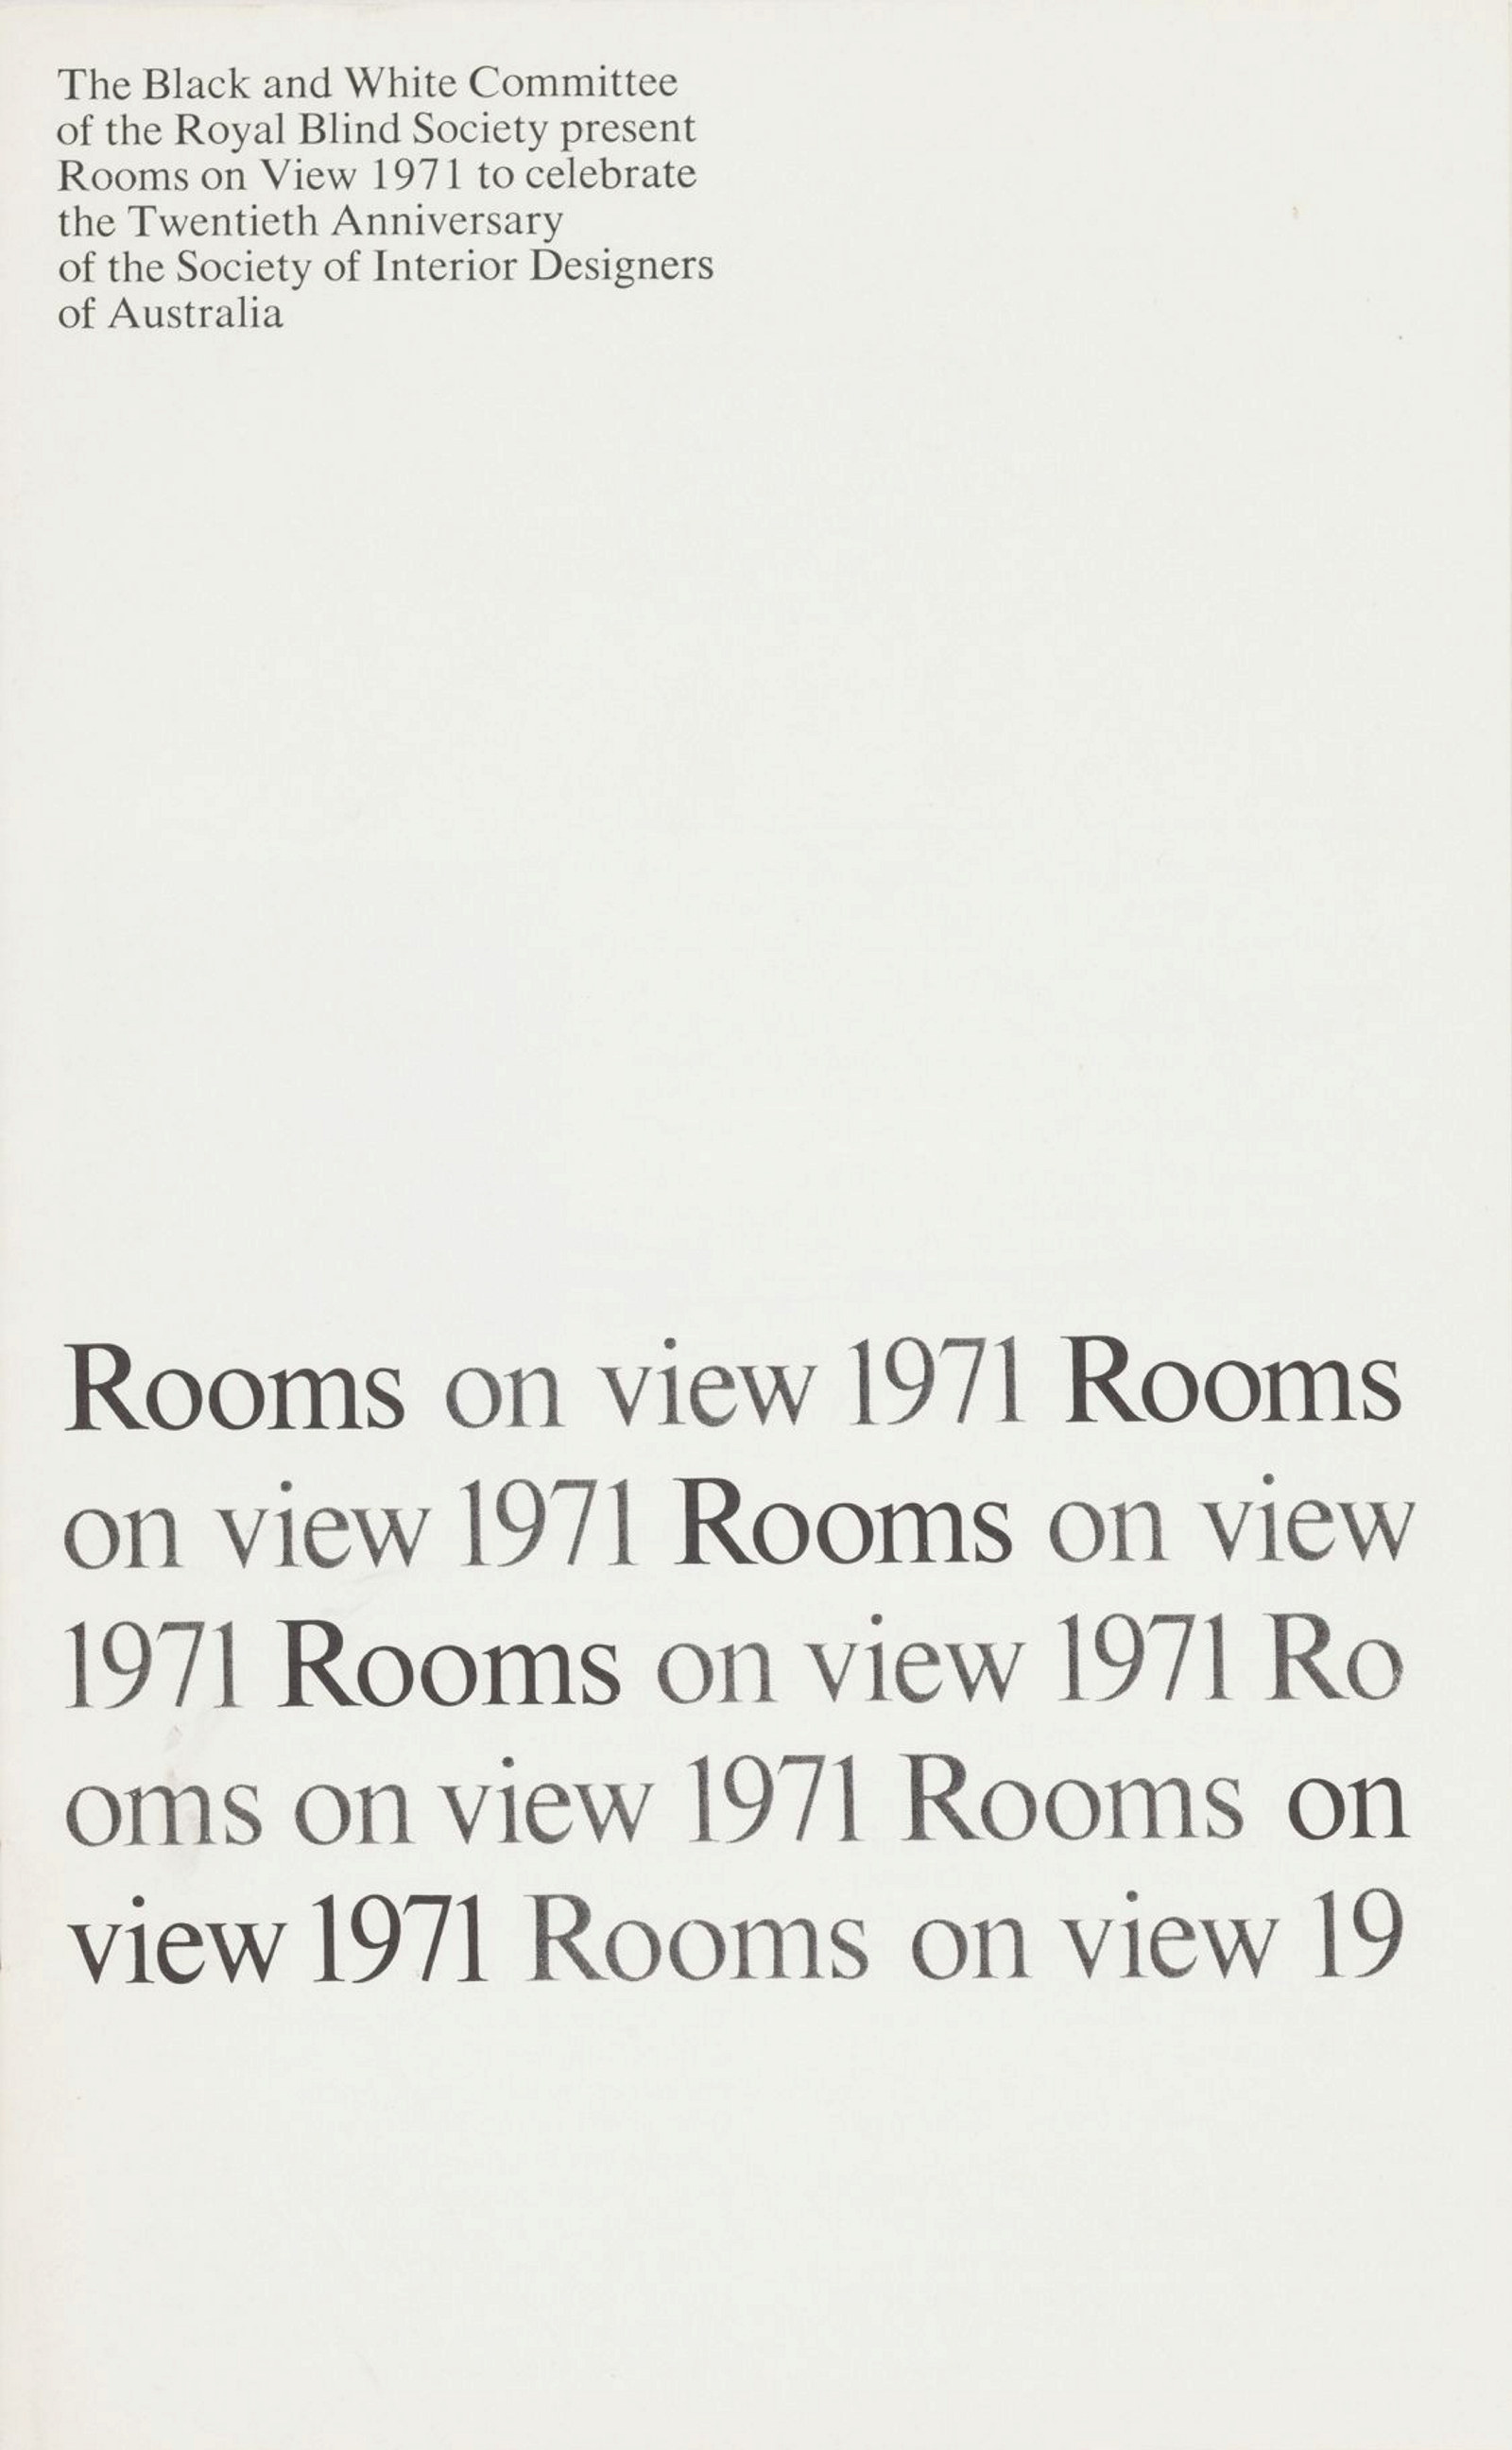 'Rooms on view 1971'